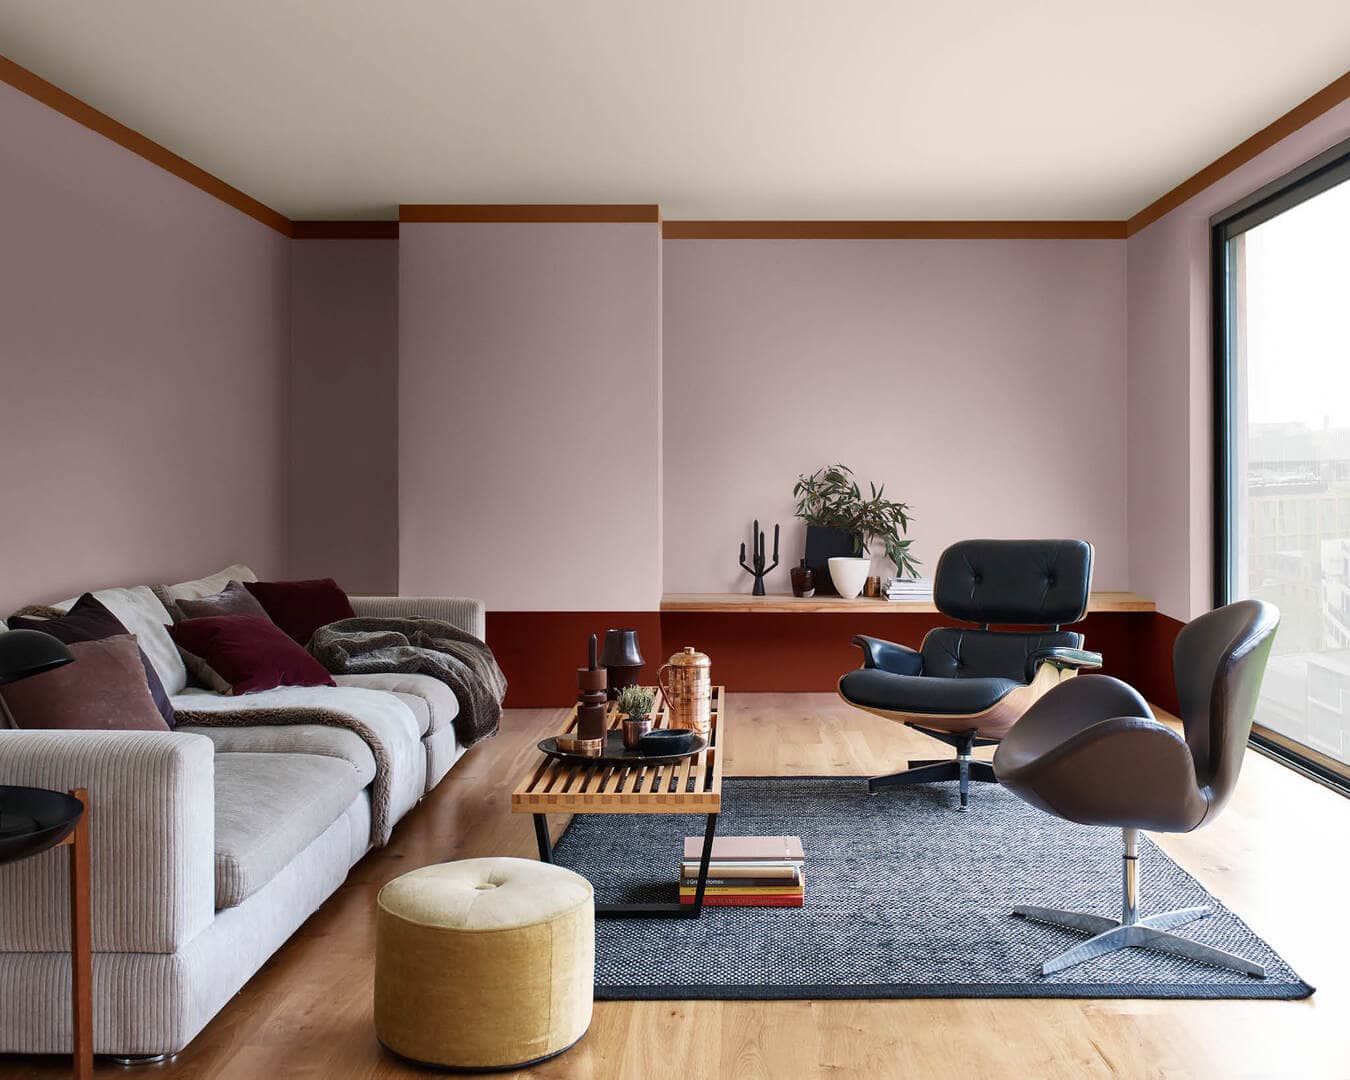 7 Interior Color Influences on Your Mental Health